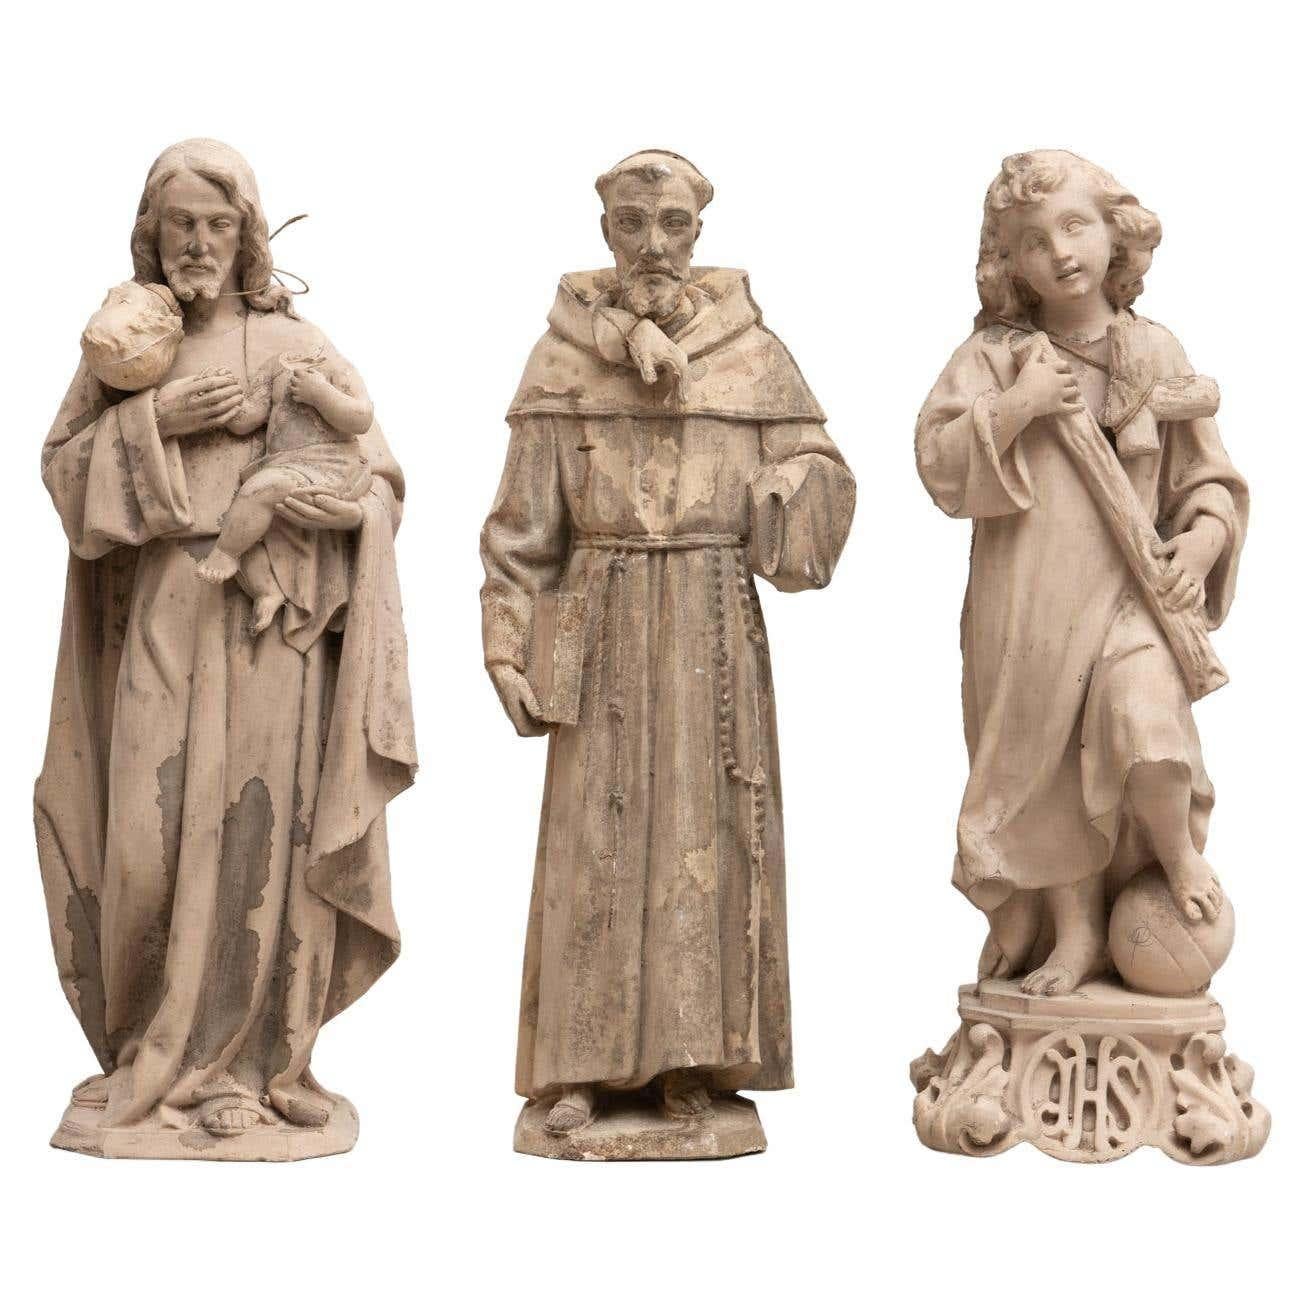 Set of 3 traditional religious plaster figures.

Made in traditional Catalan atelier in Olot, Spain, circa 1950.

In original condition, with minor wear consistent with age and use, preserving a beautiful patina.

Olot has a long tradition in